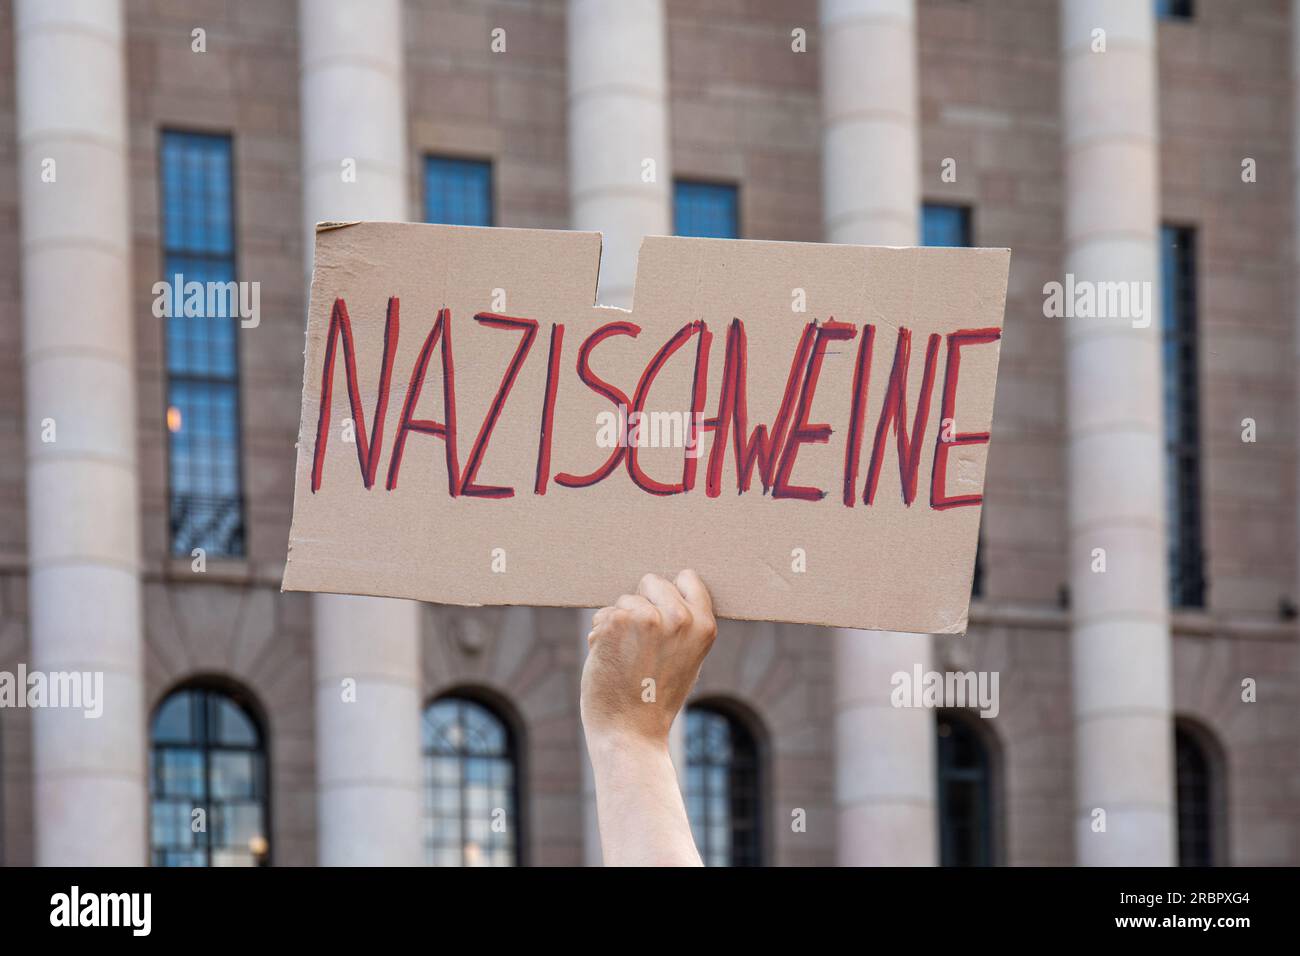 Nazischweine. A cardboard sign at demonstration against far-right minister Vilhelm Junnila in front of Parliament House in Helsinki, Finland. Stock Photo